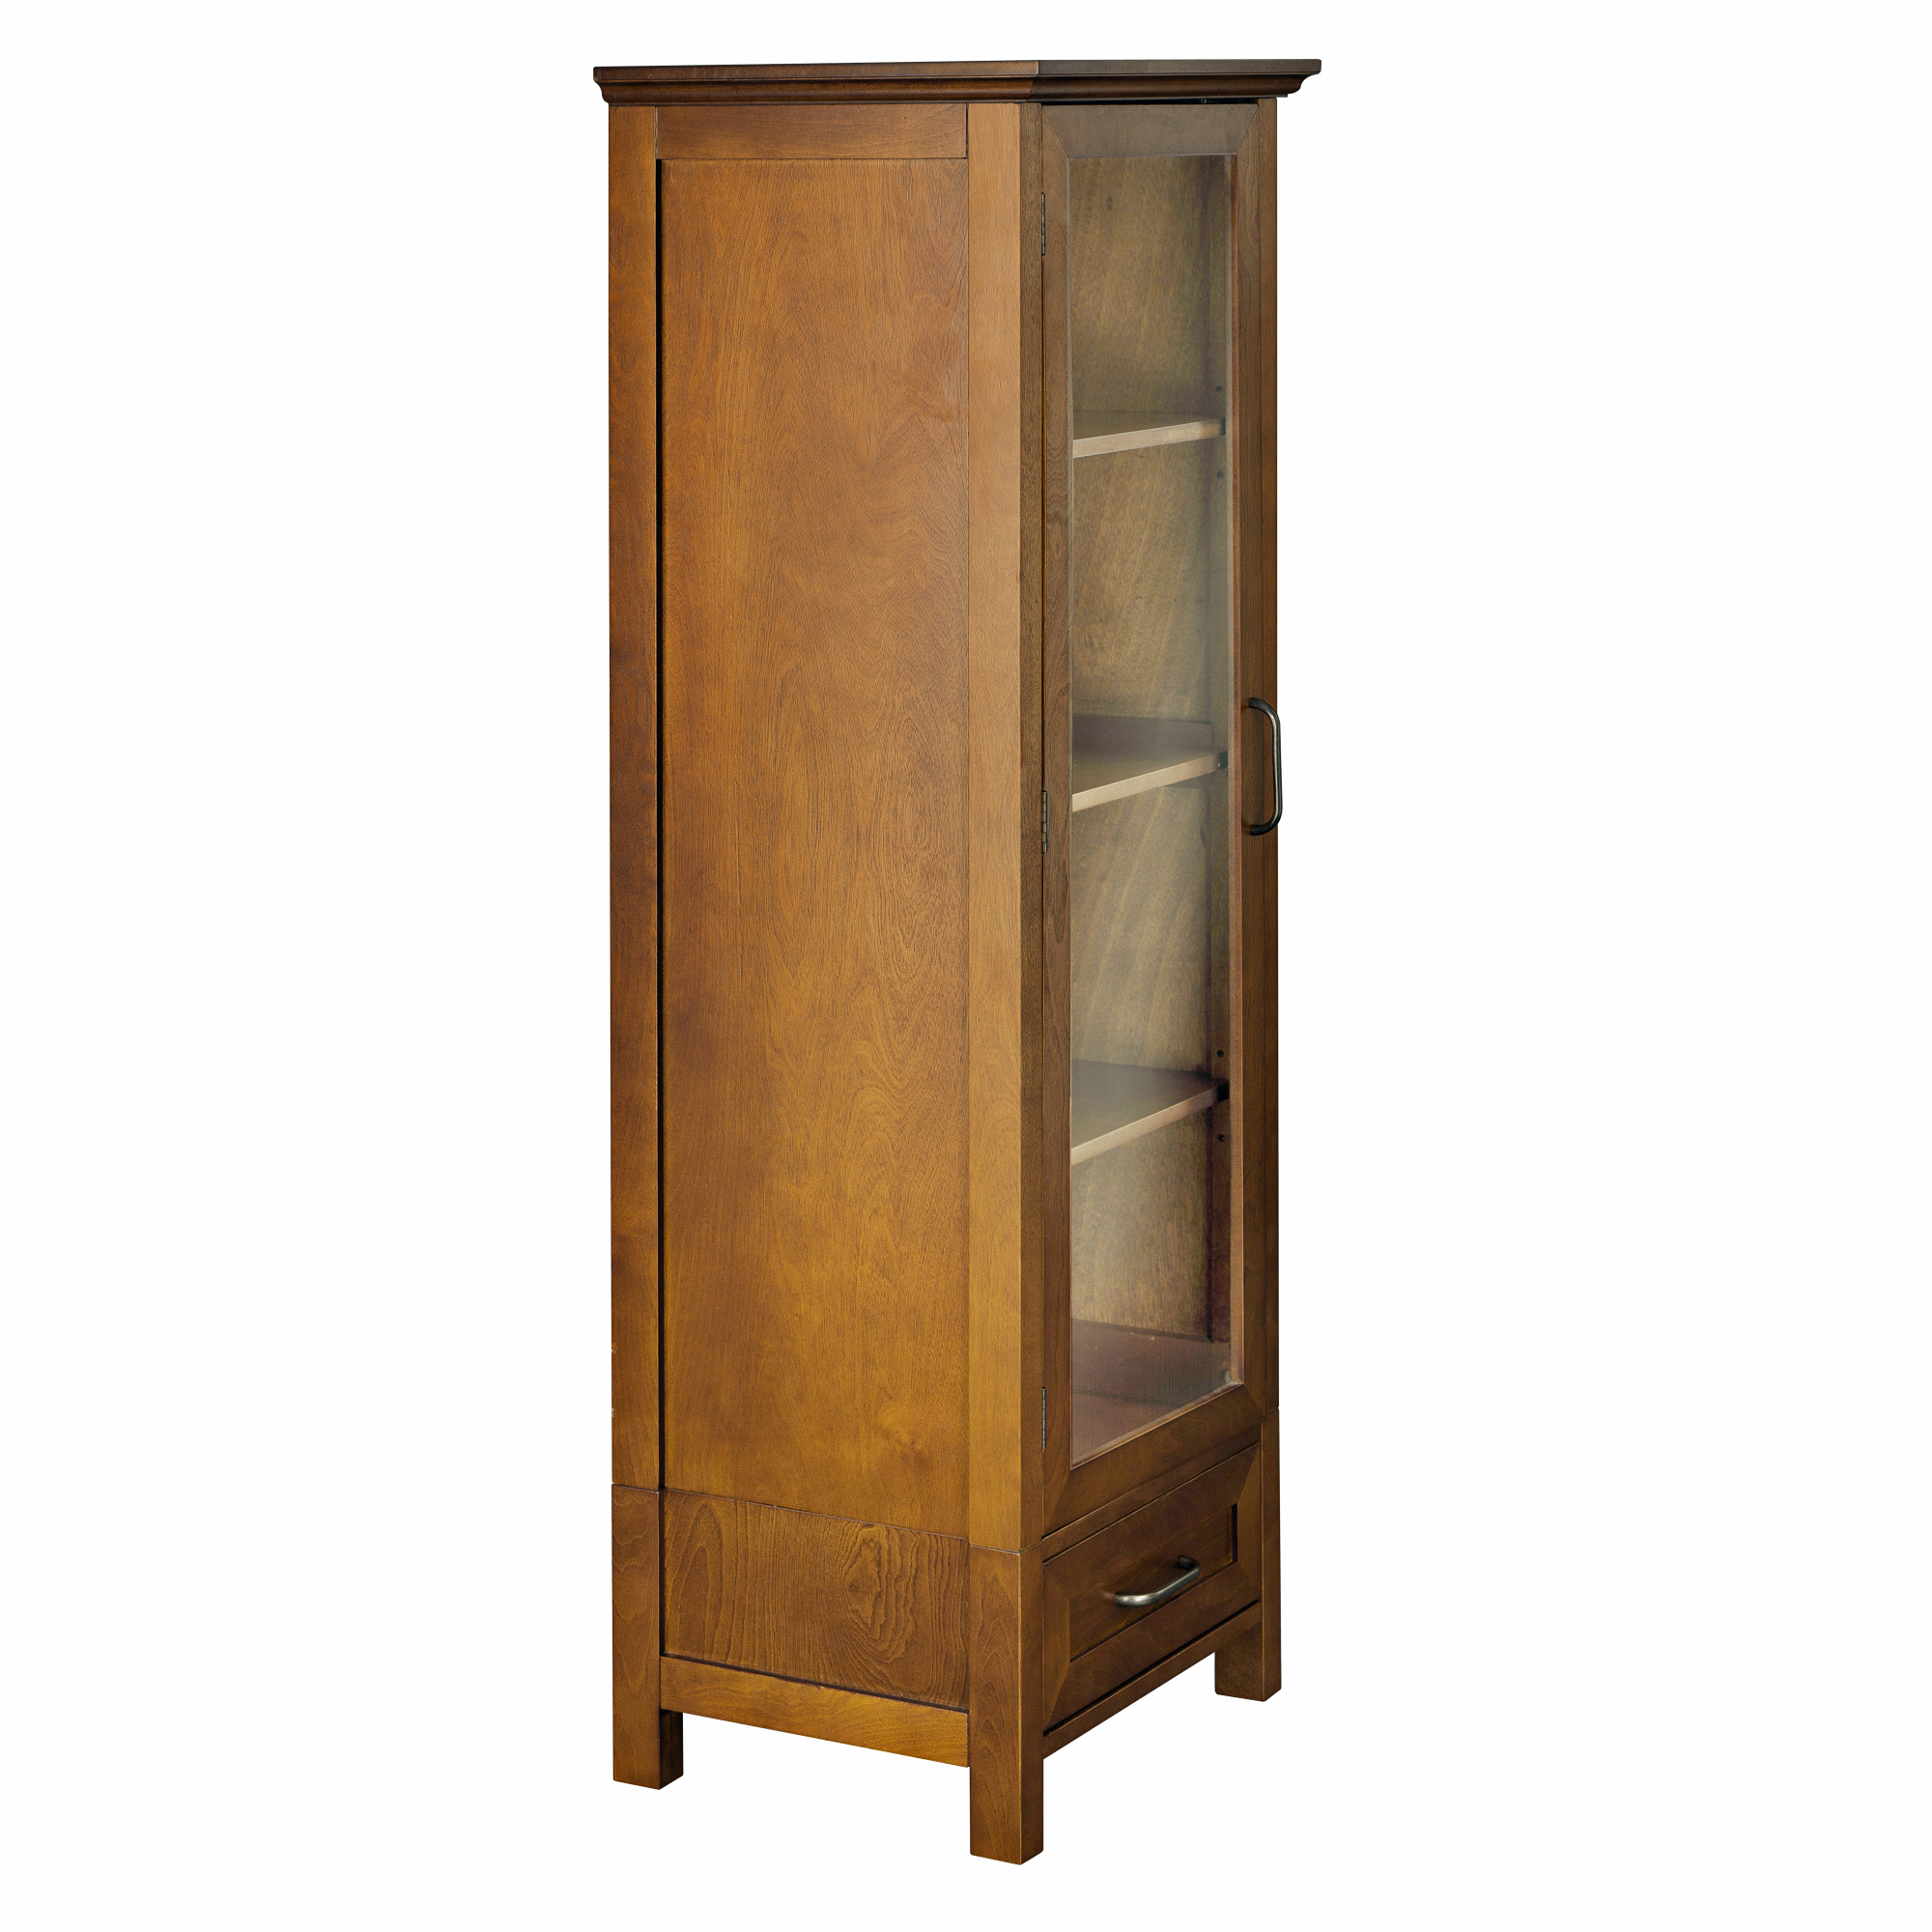 Elegant Home Fashions Calais Wood Linen Cabinet with Glass Door, Oil Oak - image 2 of 7